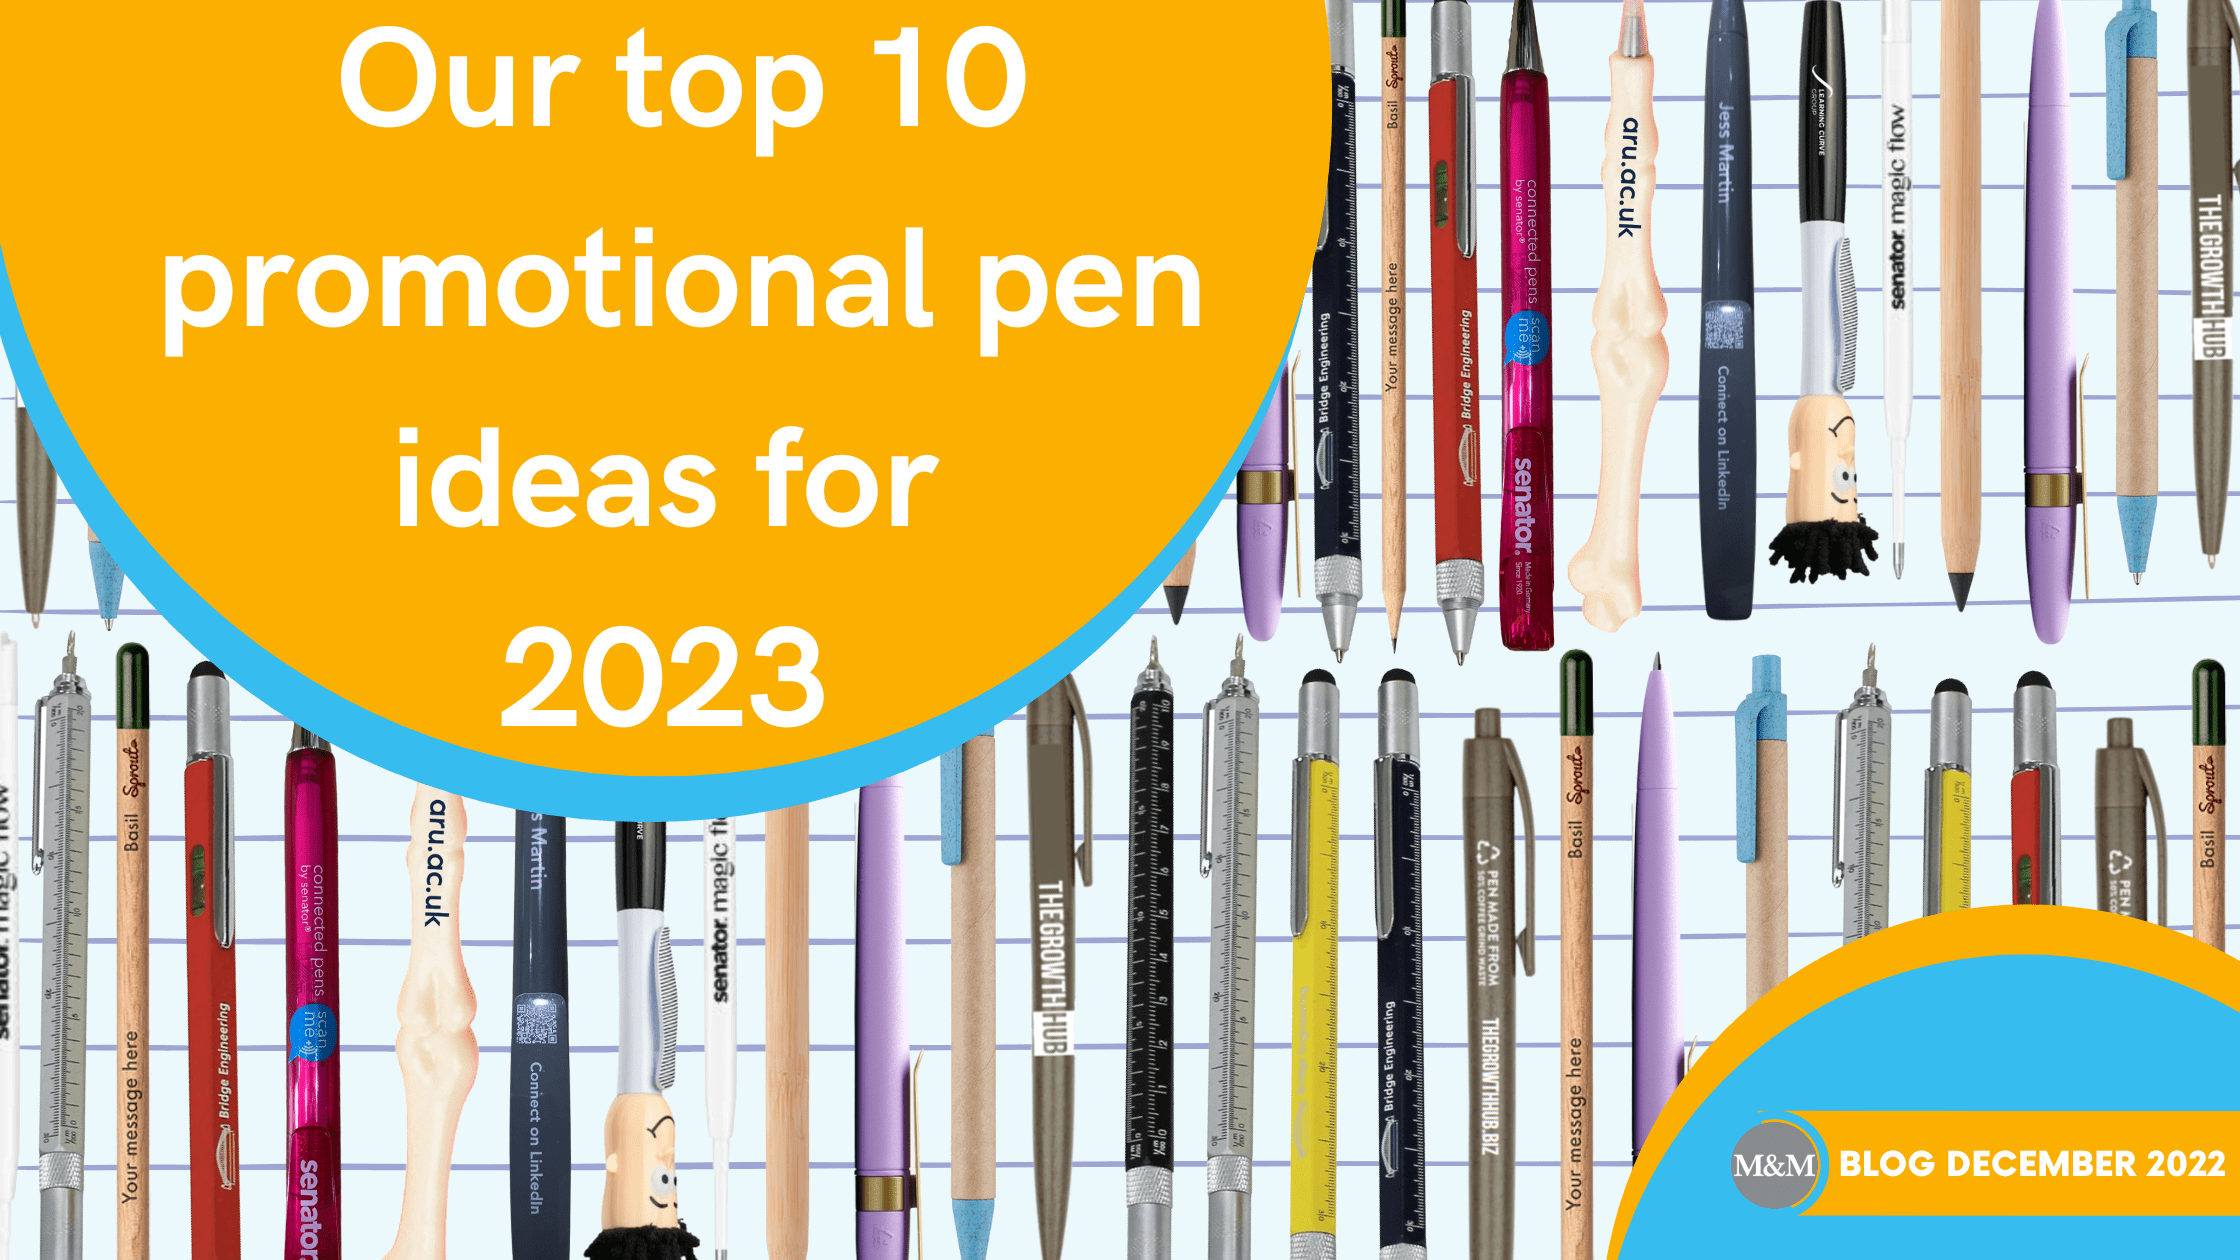 Our top 10 promotional pen ideas for 2023